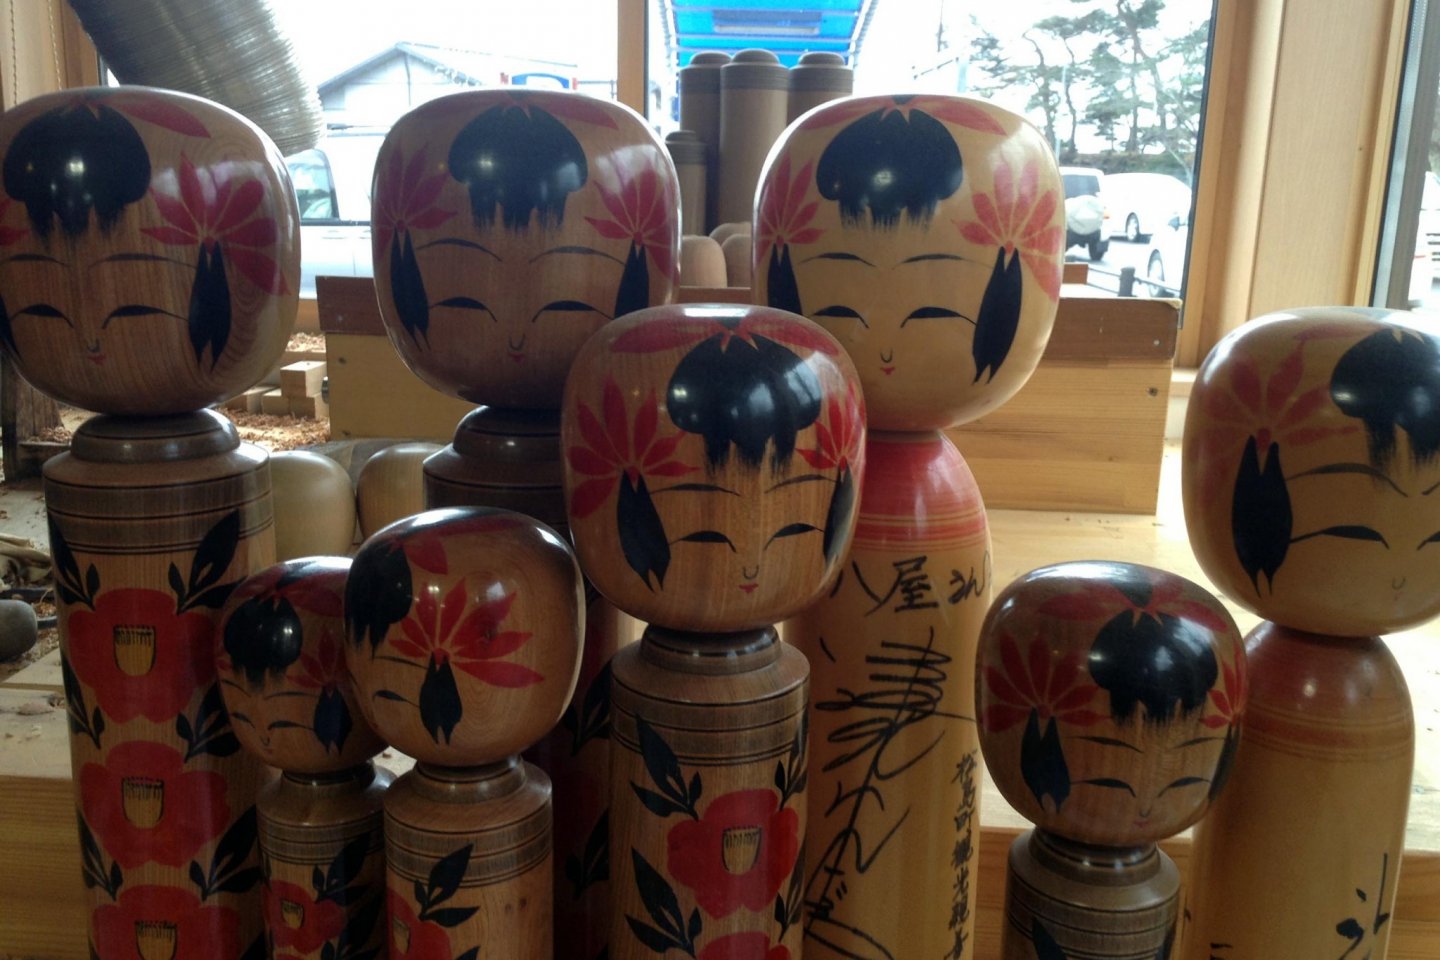 Some of the finished kokeshi dolls. 